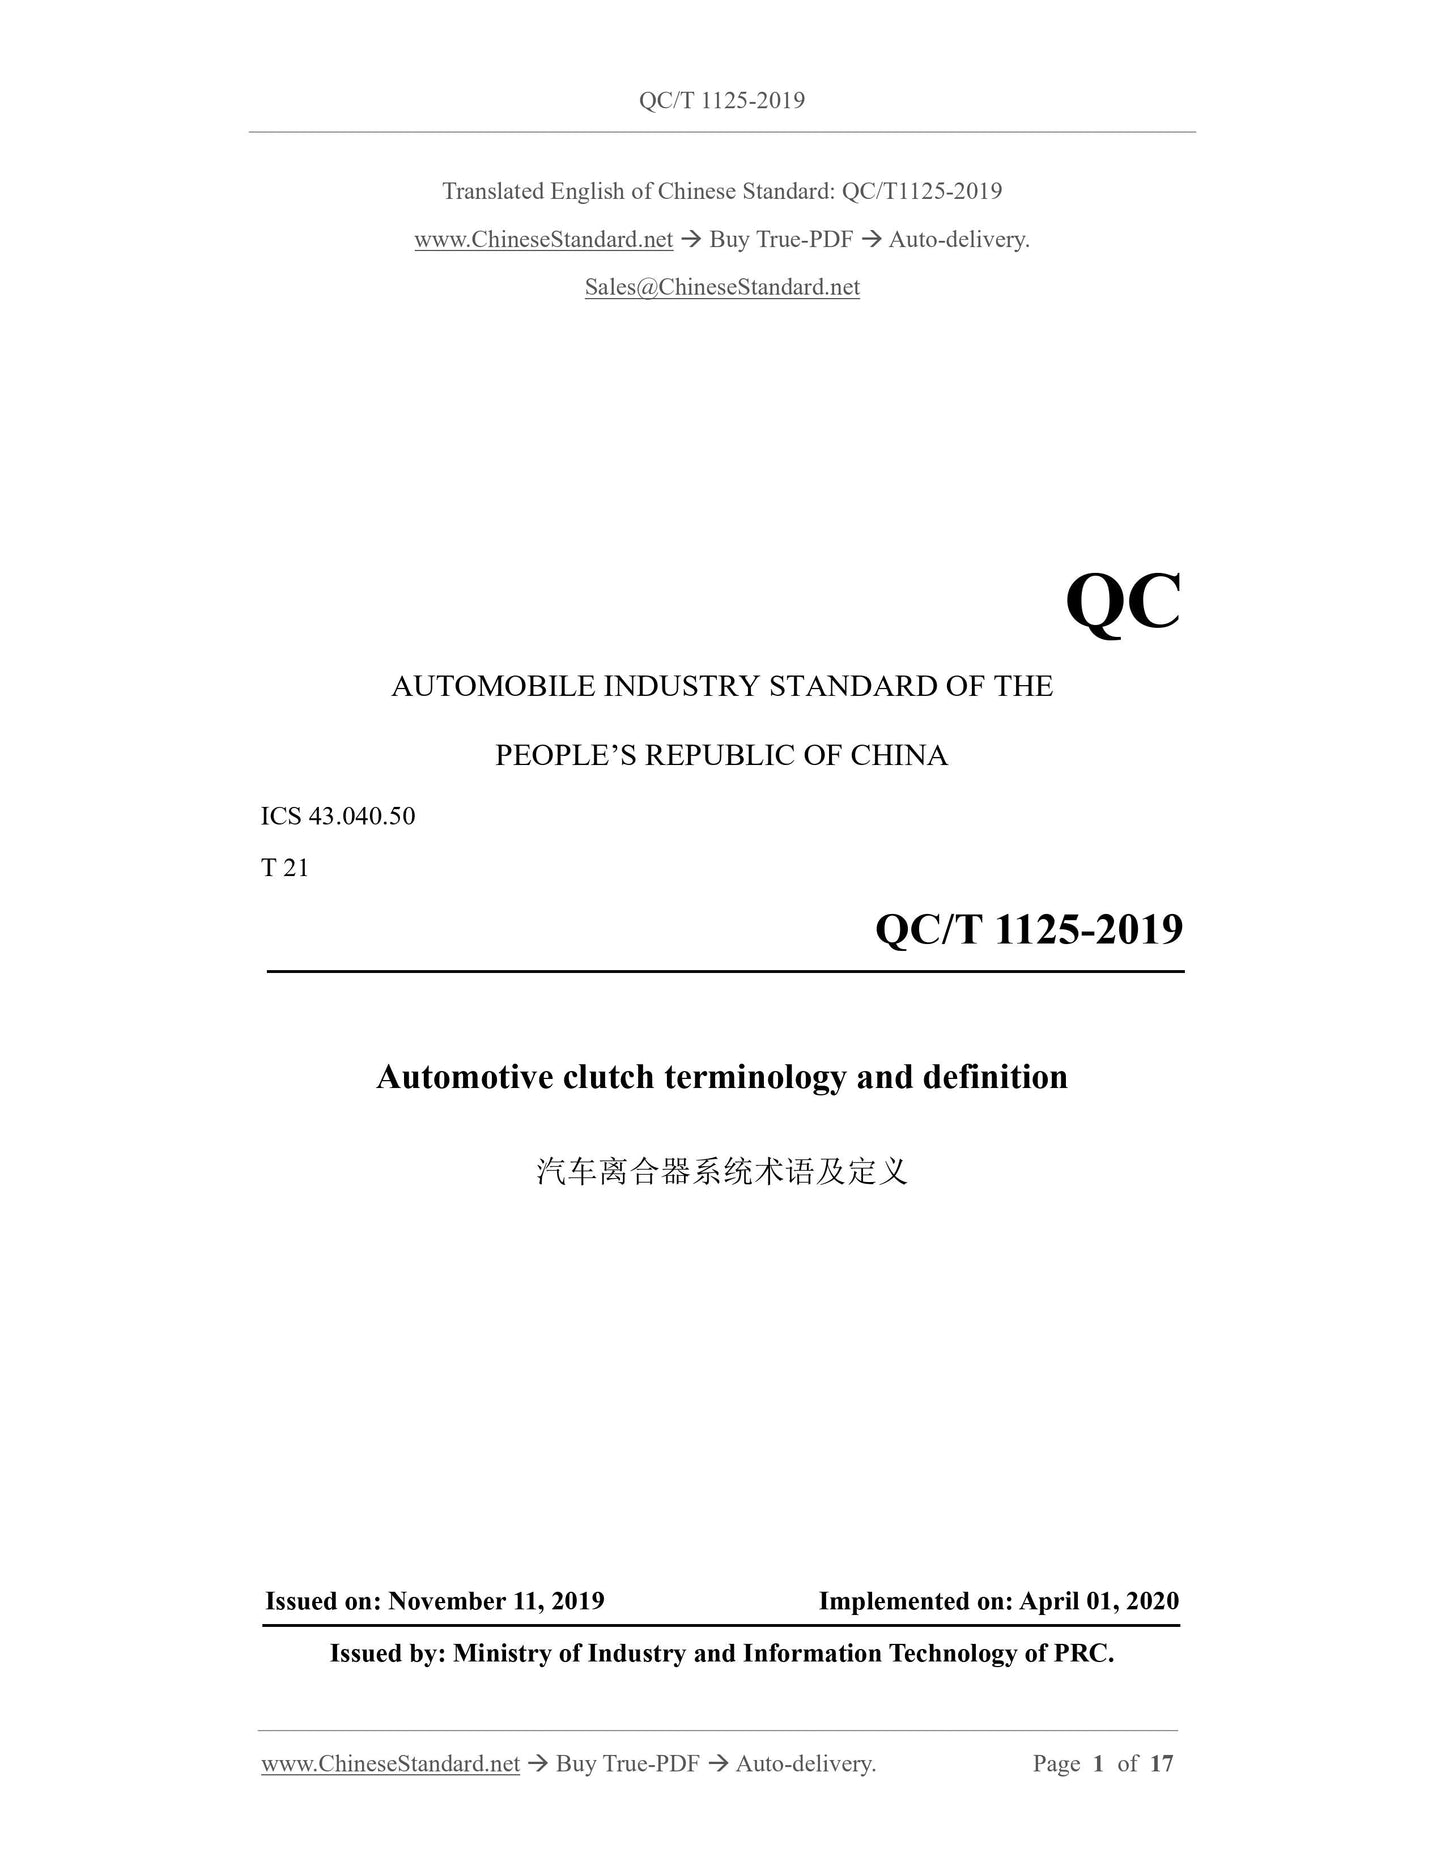 QC/T 1125-2019 Page 1